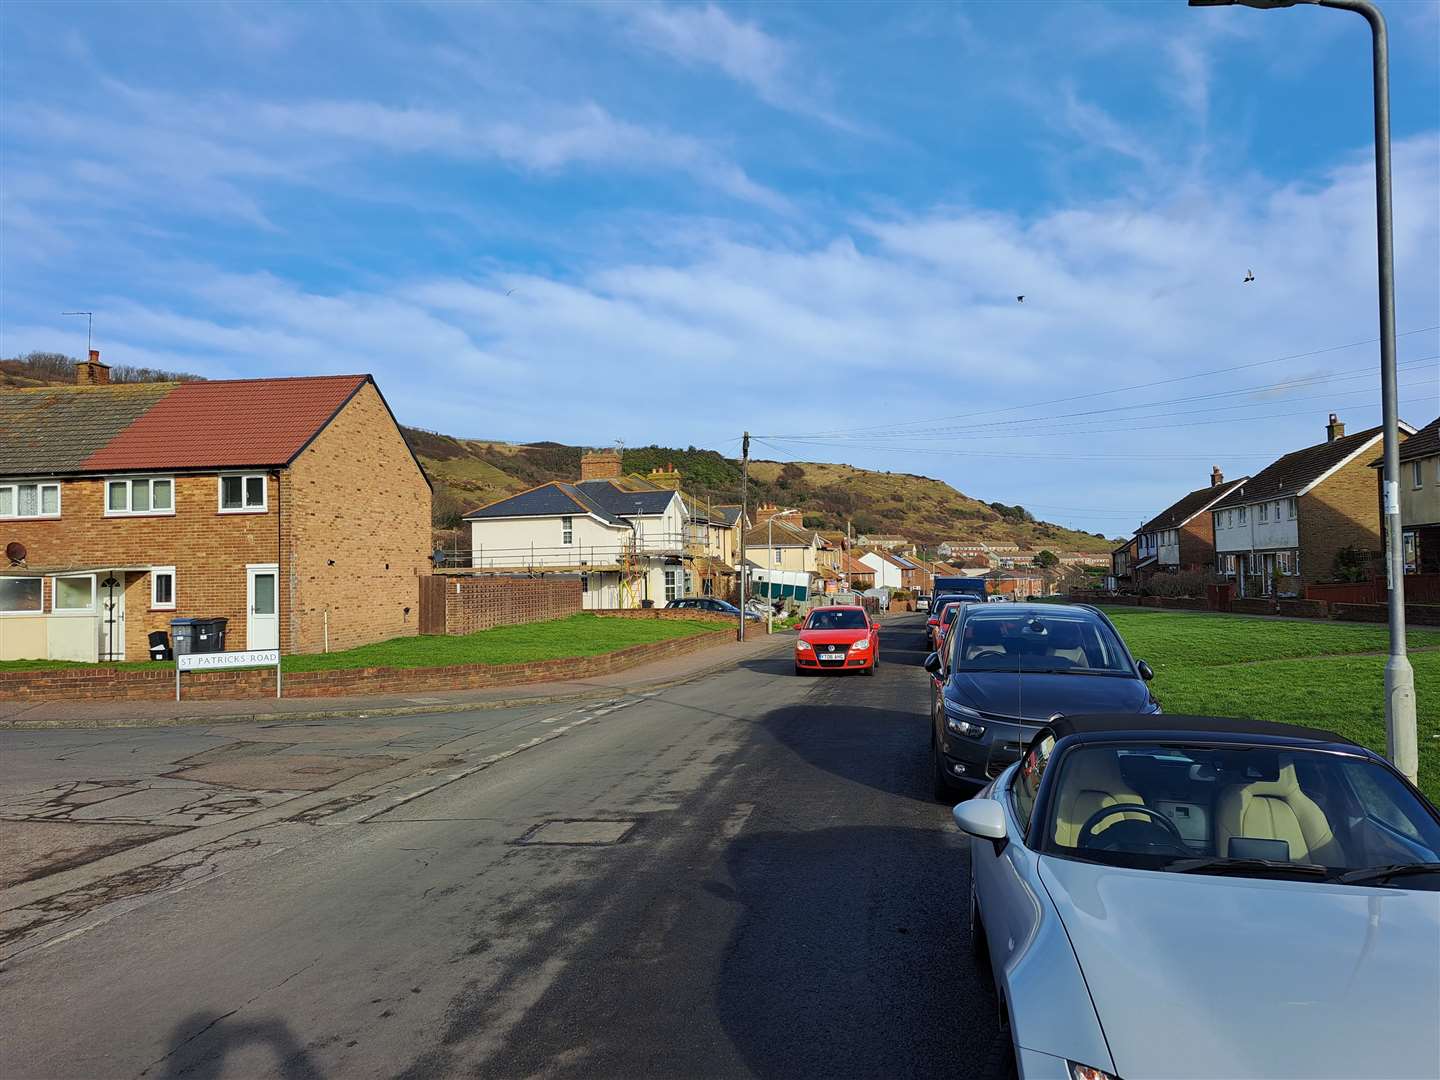 General view of Aycliffe's main road, Old Folkestone Road